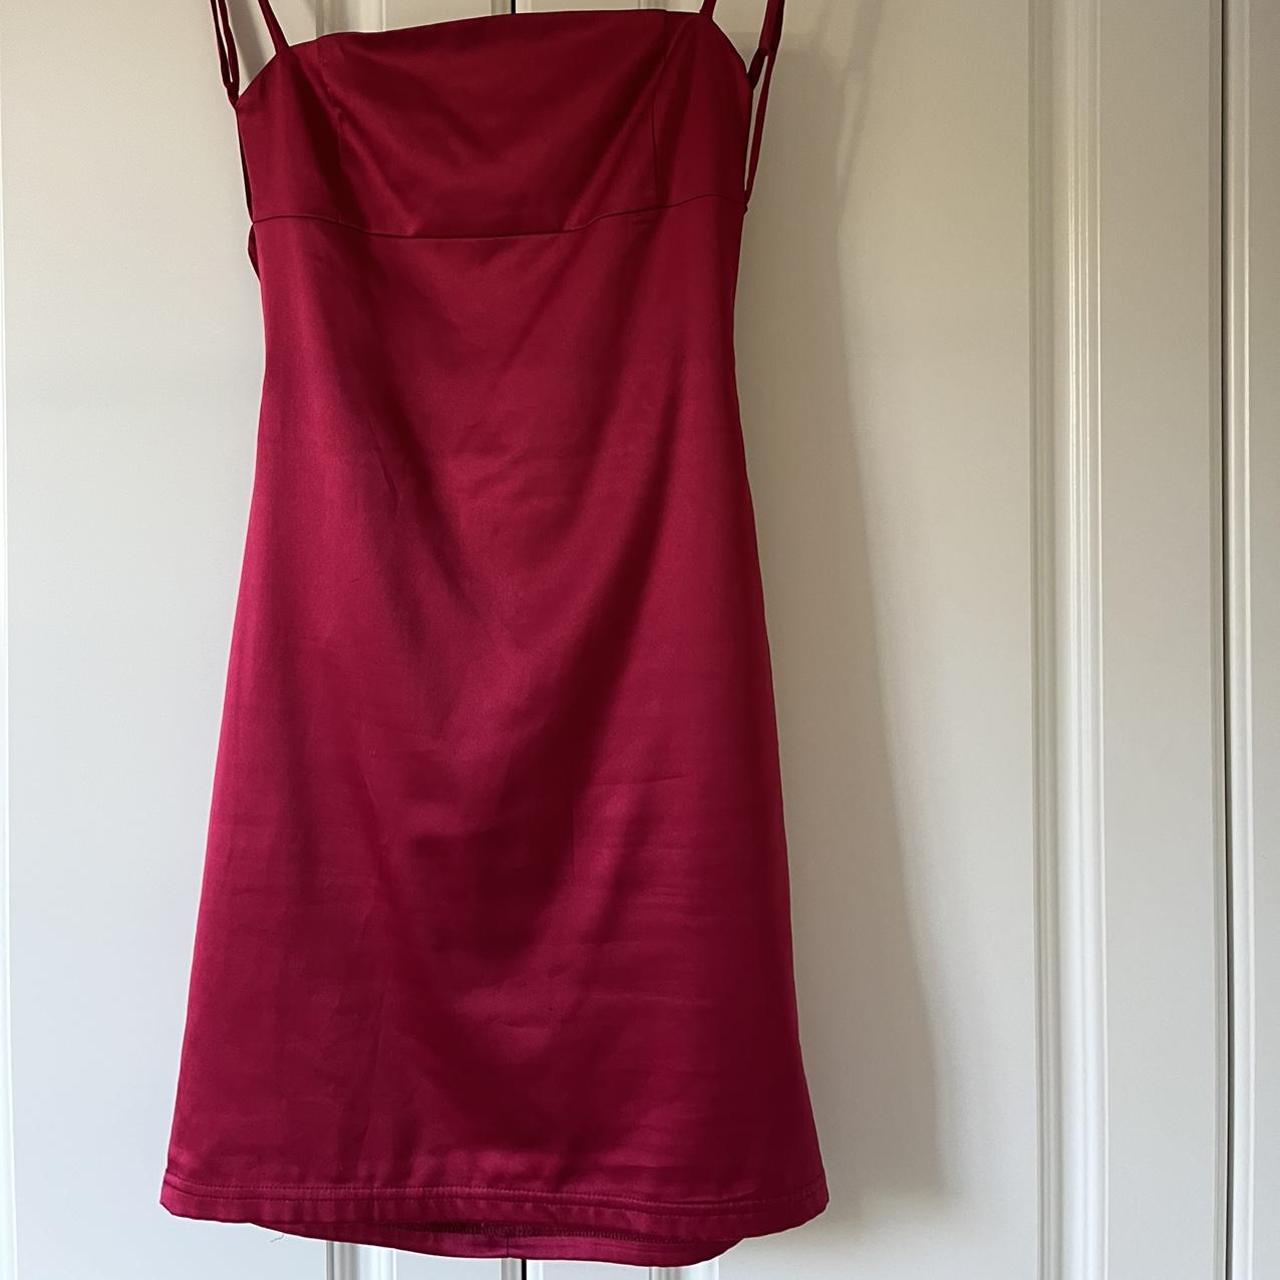 Oh polly pink/ red satin bodycon dress - size 8 - Depop